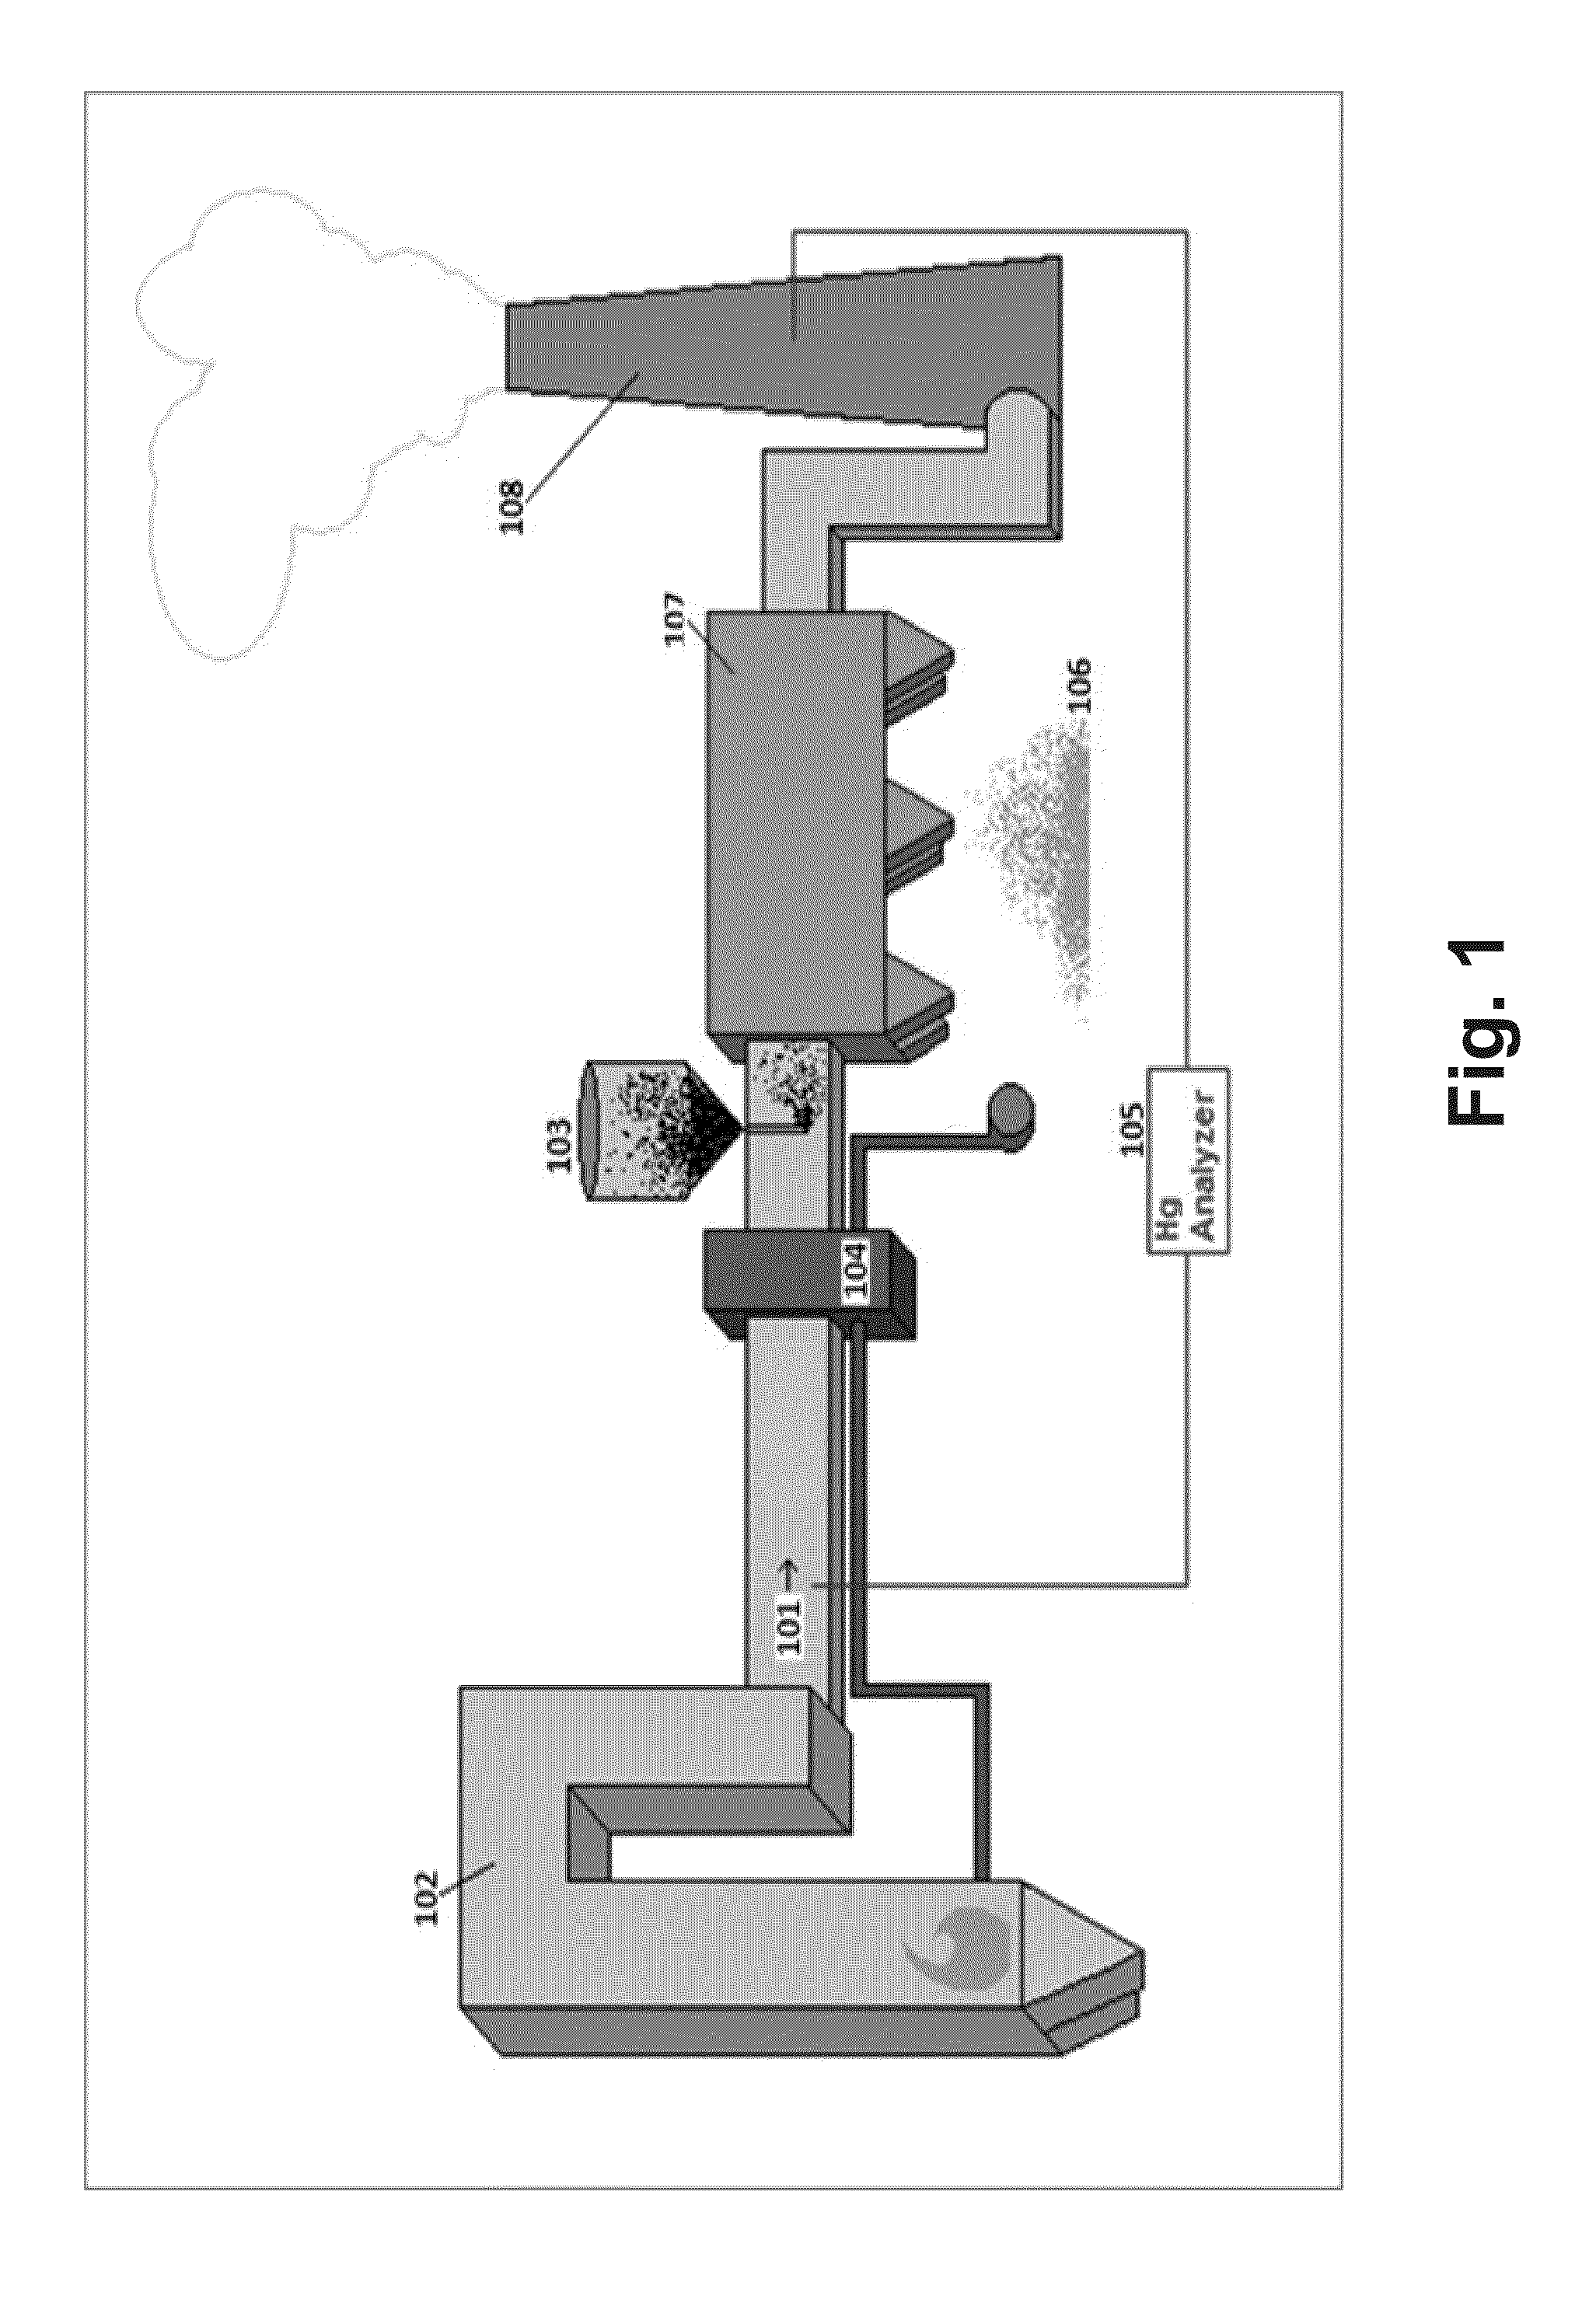 Composition for acid gas tolerant removal of mercury from a flue gas